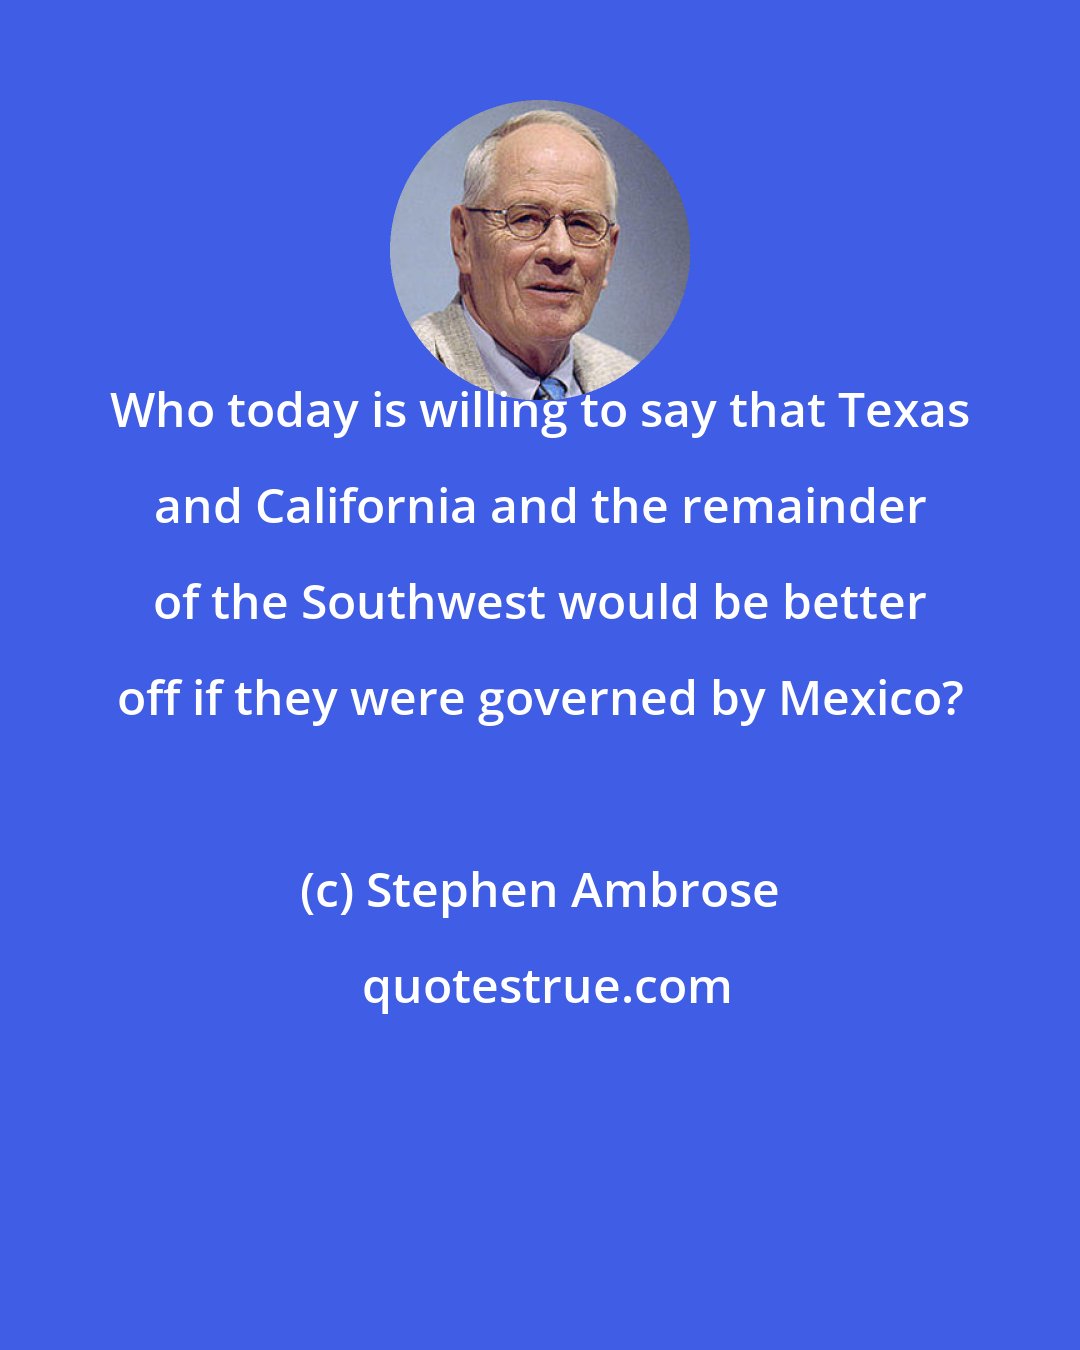 Stephen Ambrose: Who today is willing to say that Texas and California and the remainder of the Southwest would be better off if they were governed by Mexico?